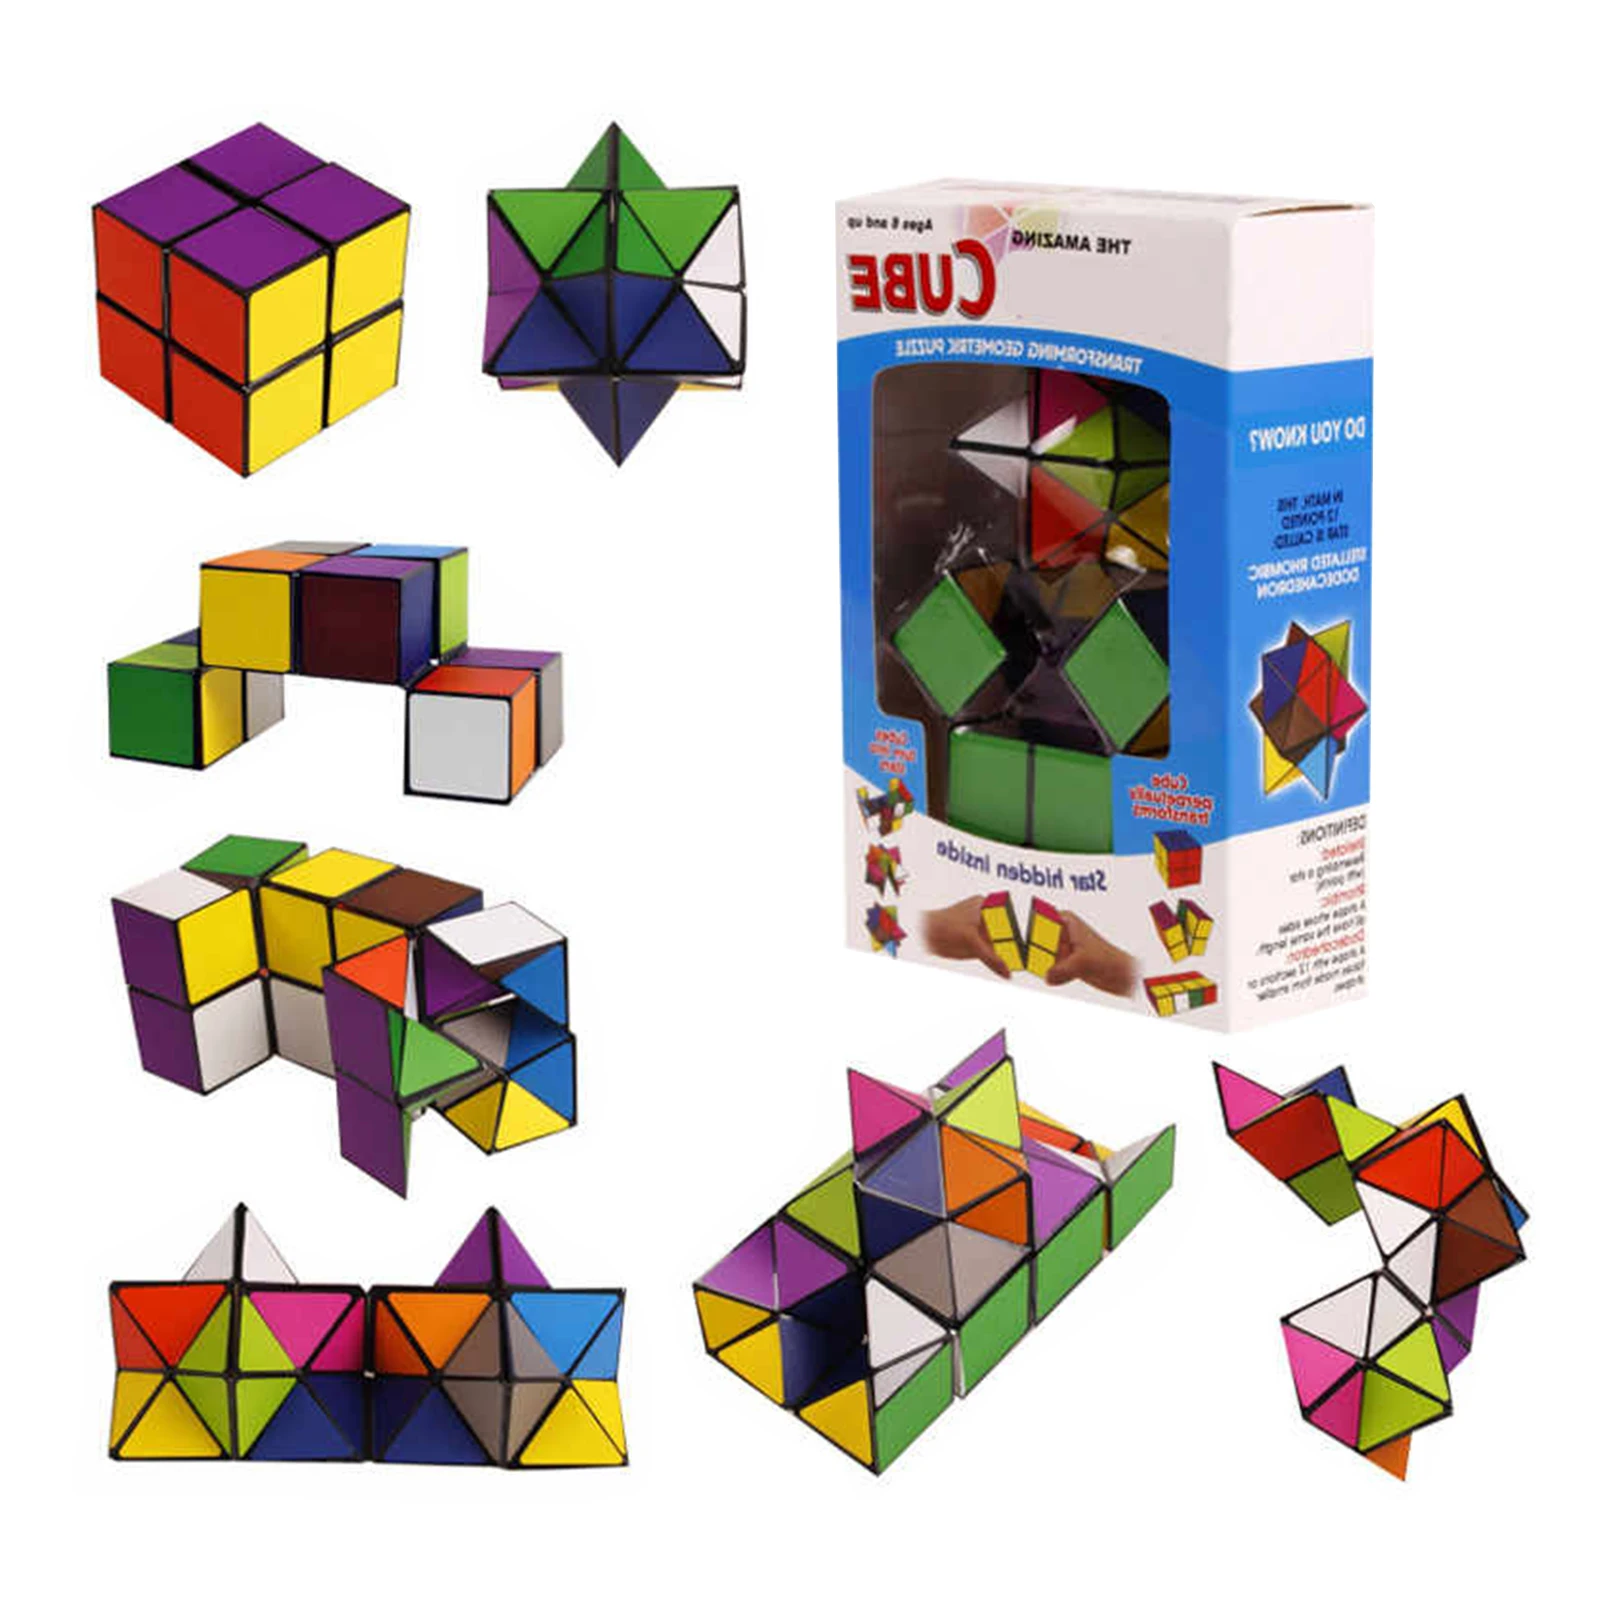 2 in 1 yoshimoto cube magic cube infinite cube toy relax puzzel game for children adults EDC Double Star Flexicube